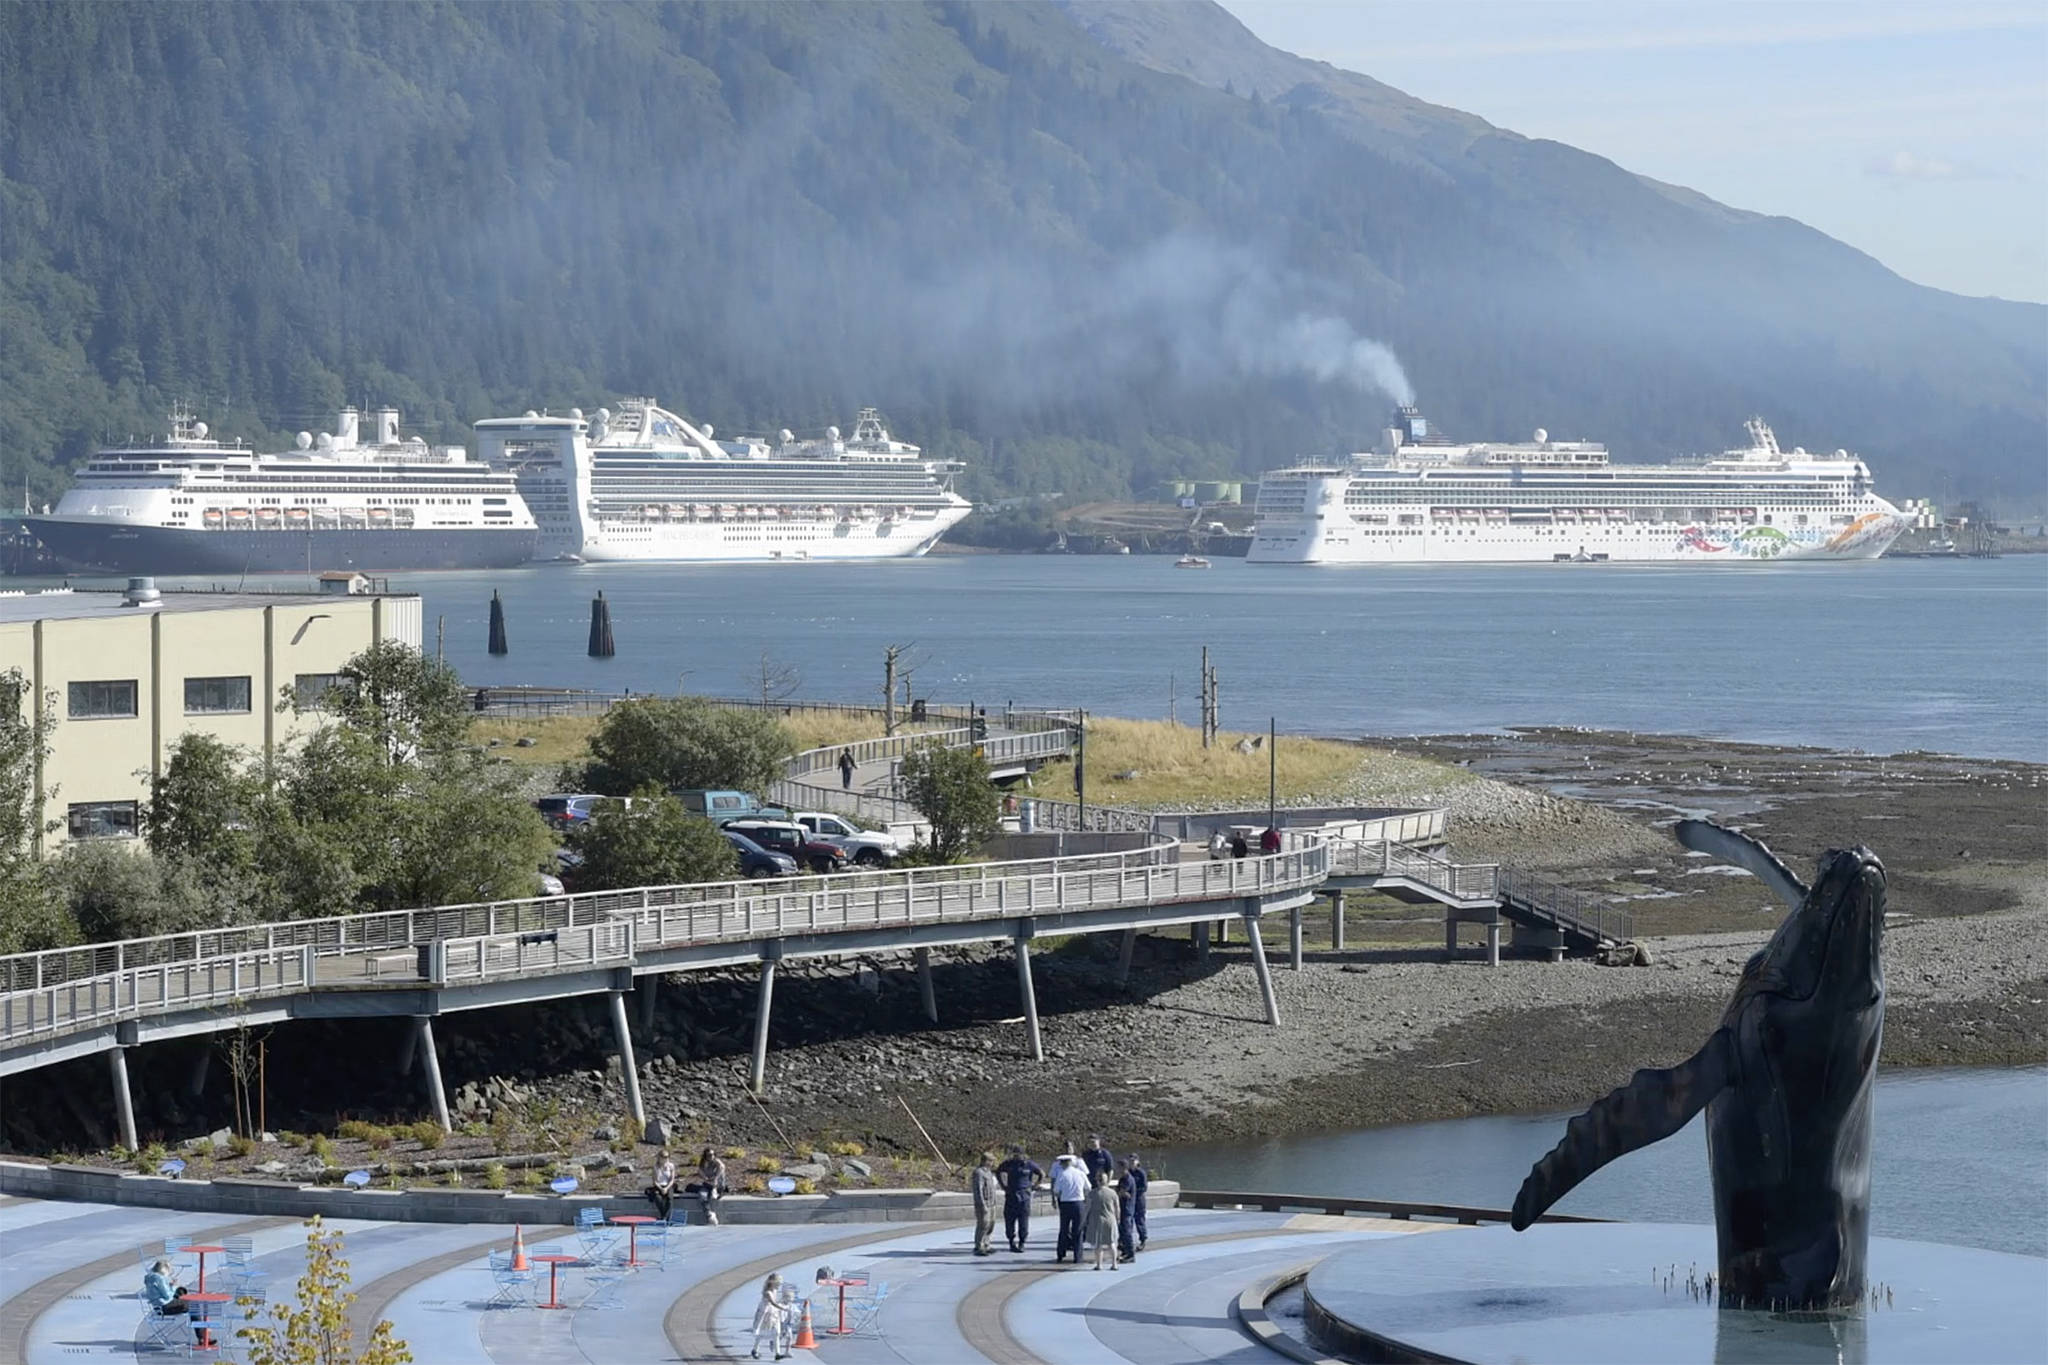 The Norwegian Pearl cruise ship, right, pulls into the AJ Dock in Juneau in September 2018. Emissions are among the many grievances raised by the Global Cruise Activist Network against the cruise industry. (Michael Penn / Juneau Empire File)